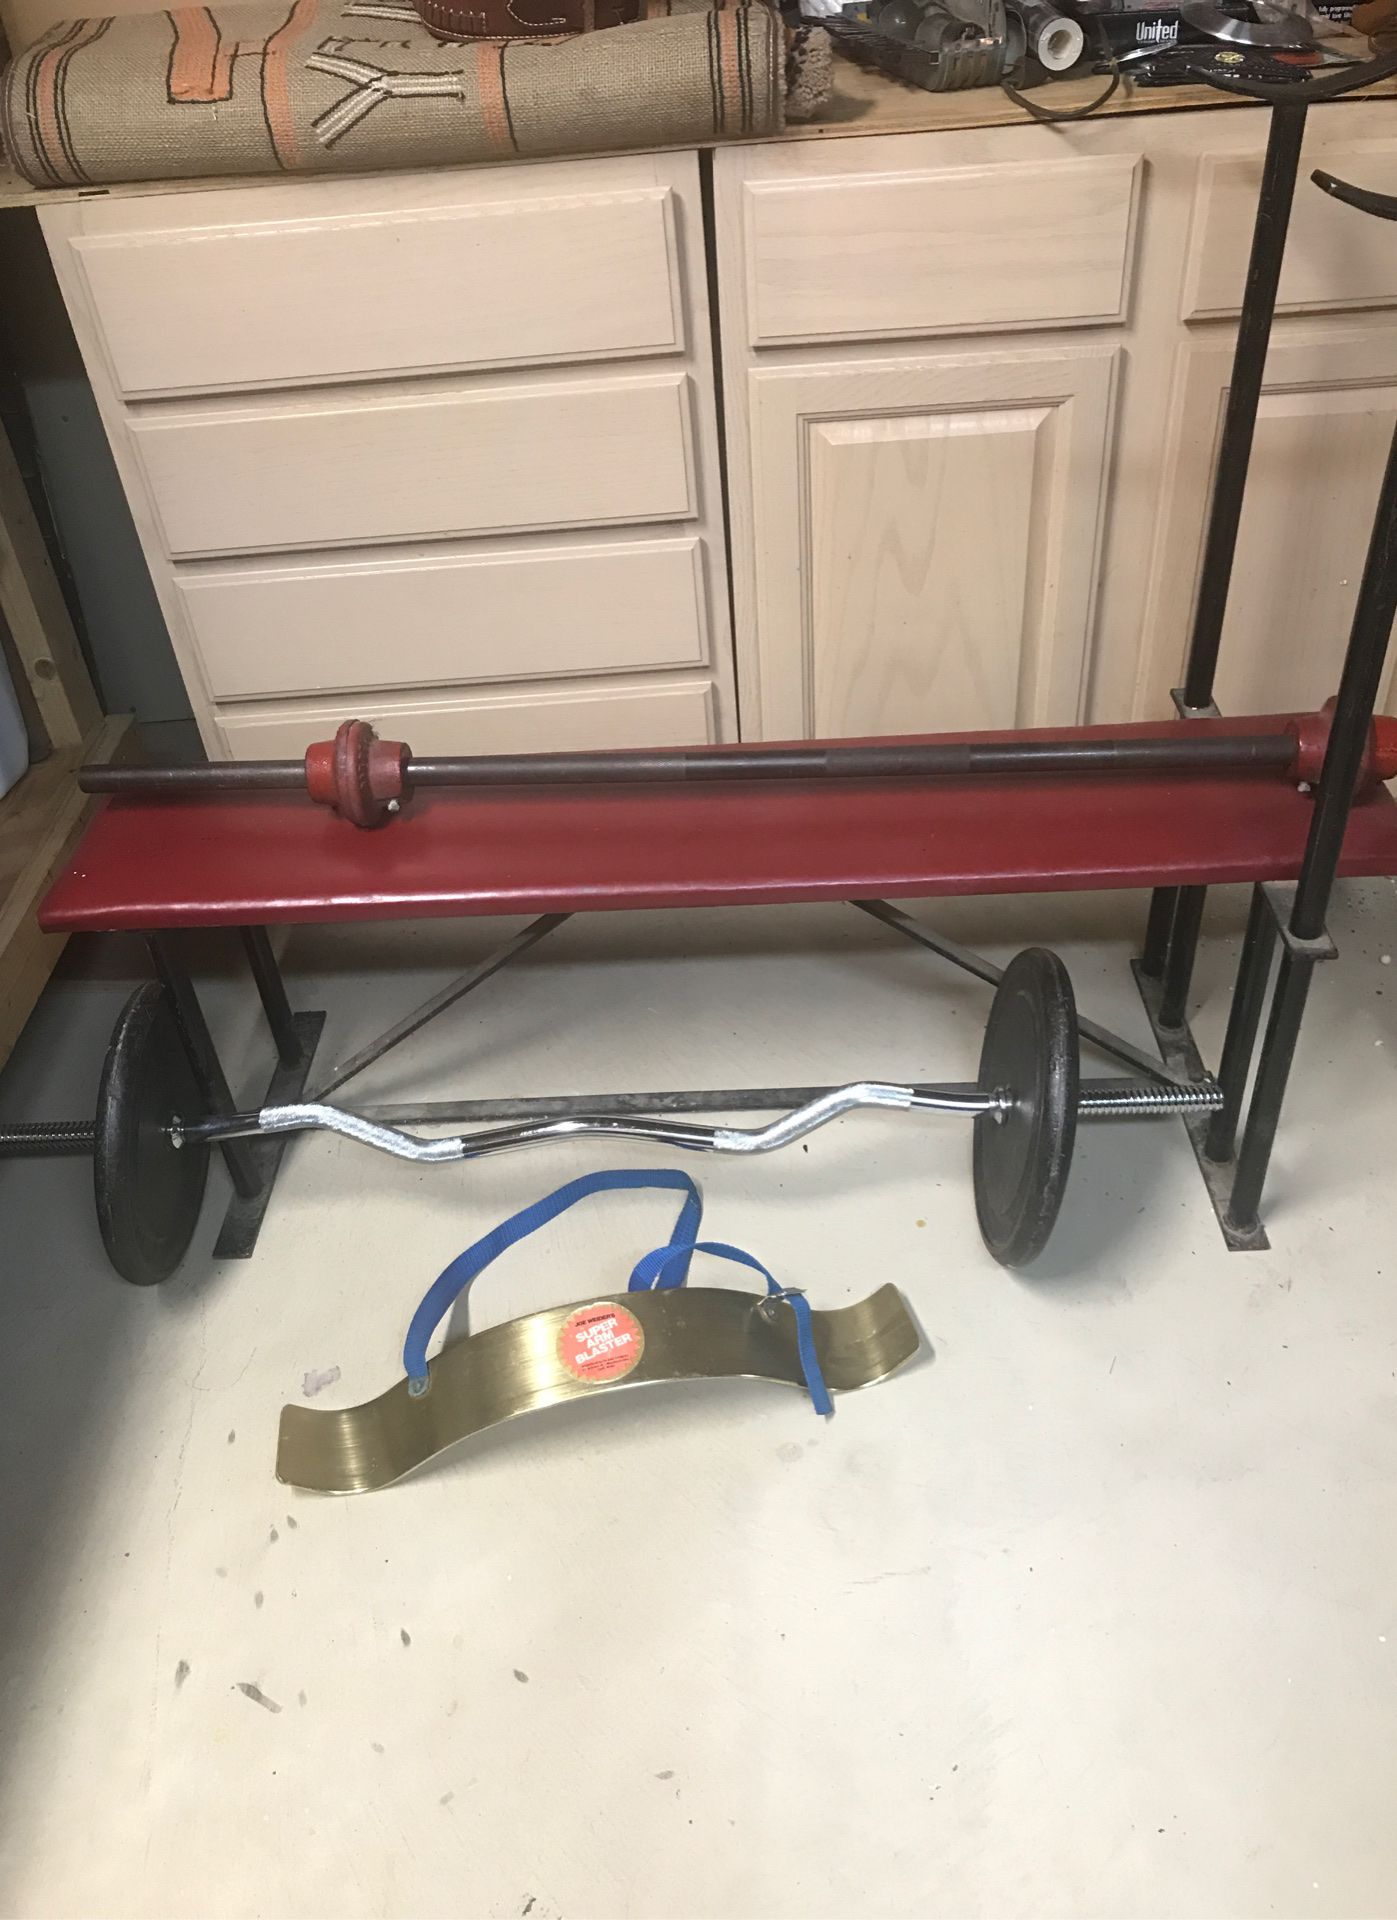 Bench press and accessories.